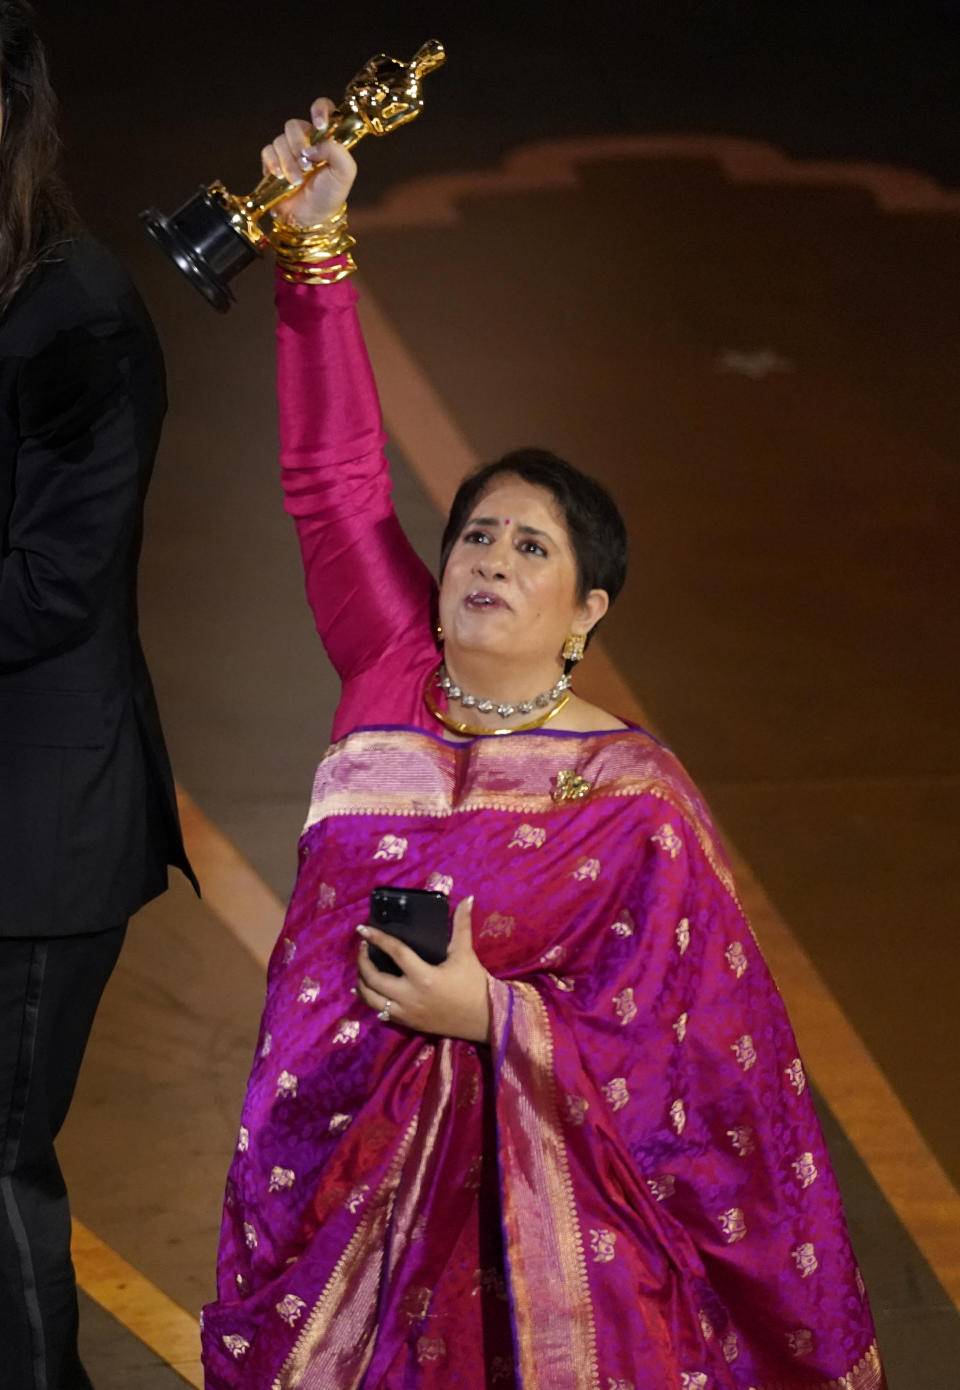 Guneet Monga accepts the award for best documentary short film for "The Elephant Whisperer" at the Oscars on Sunday, March 12, 2023, at the Dolby Theatre in Los Angeles. (AP Photo/Chris Pizzello)